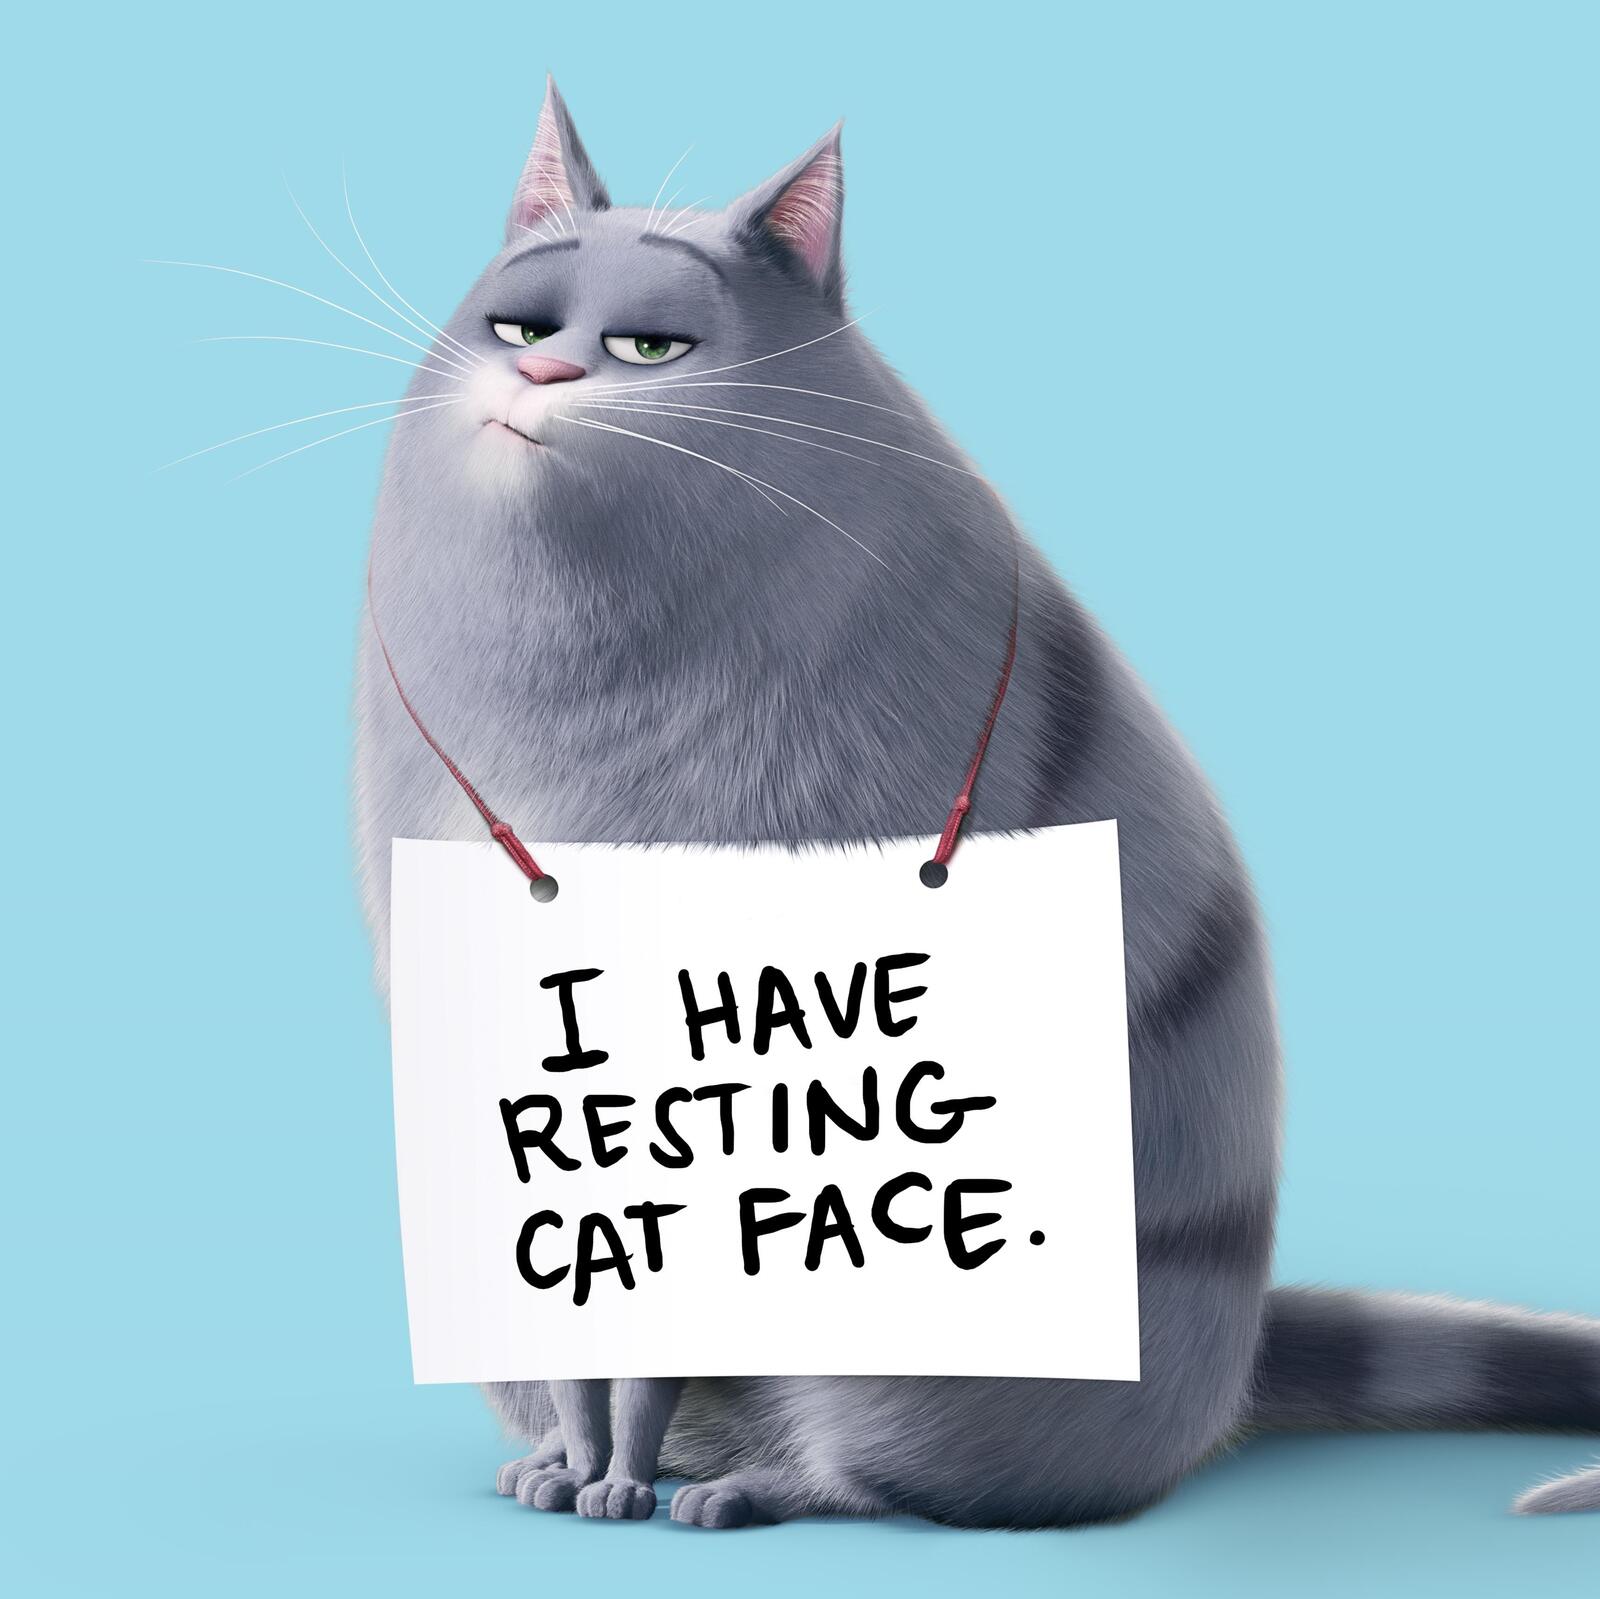 Wallpapers cats The Secret Life Of Pets animated movies on the desktop